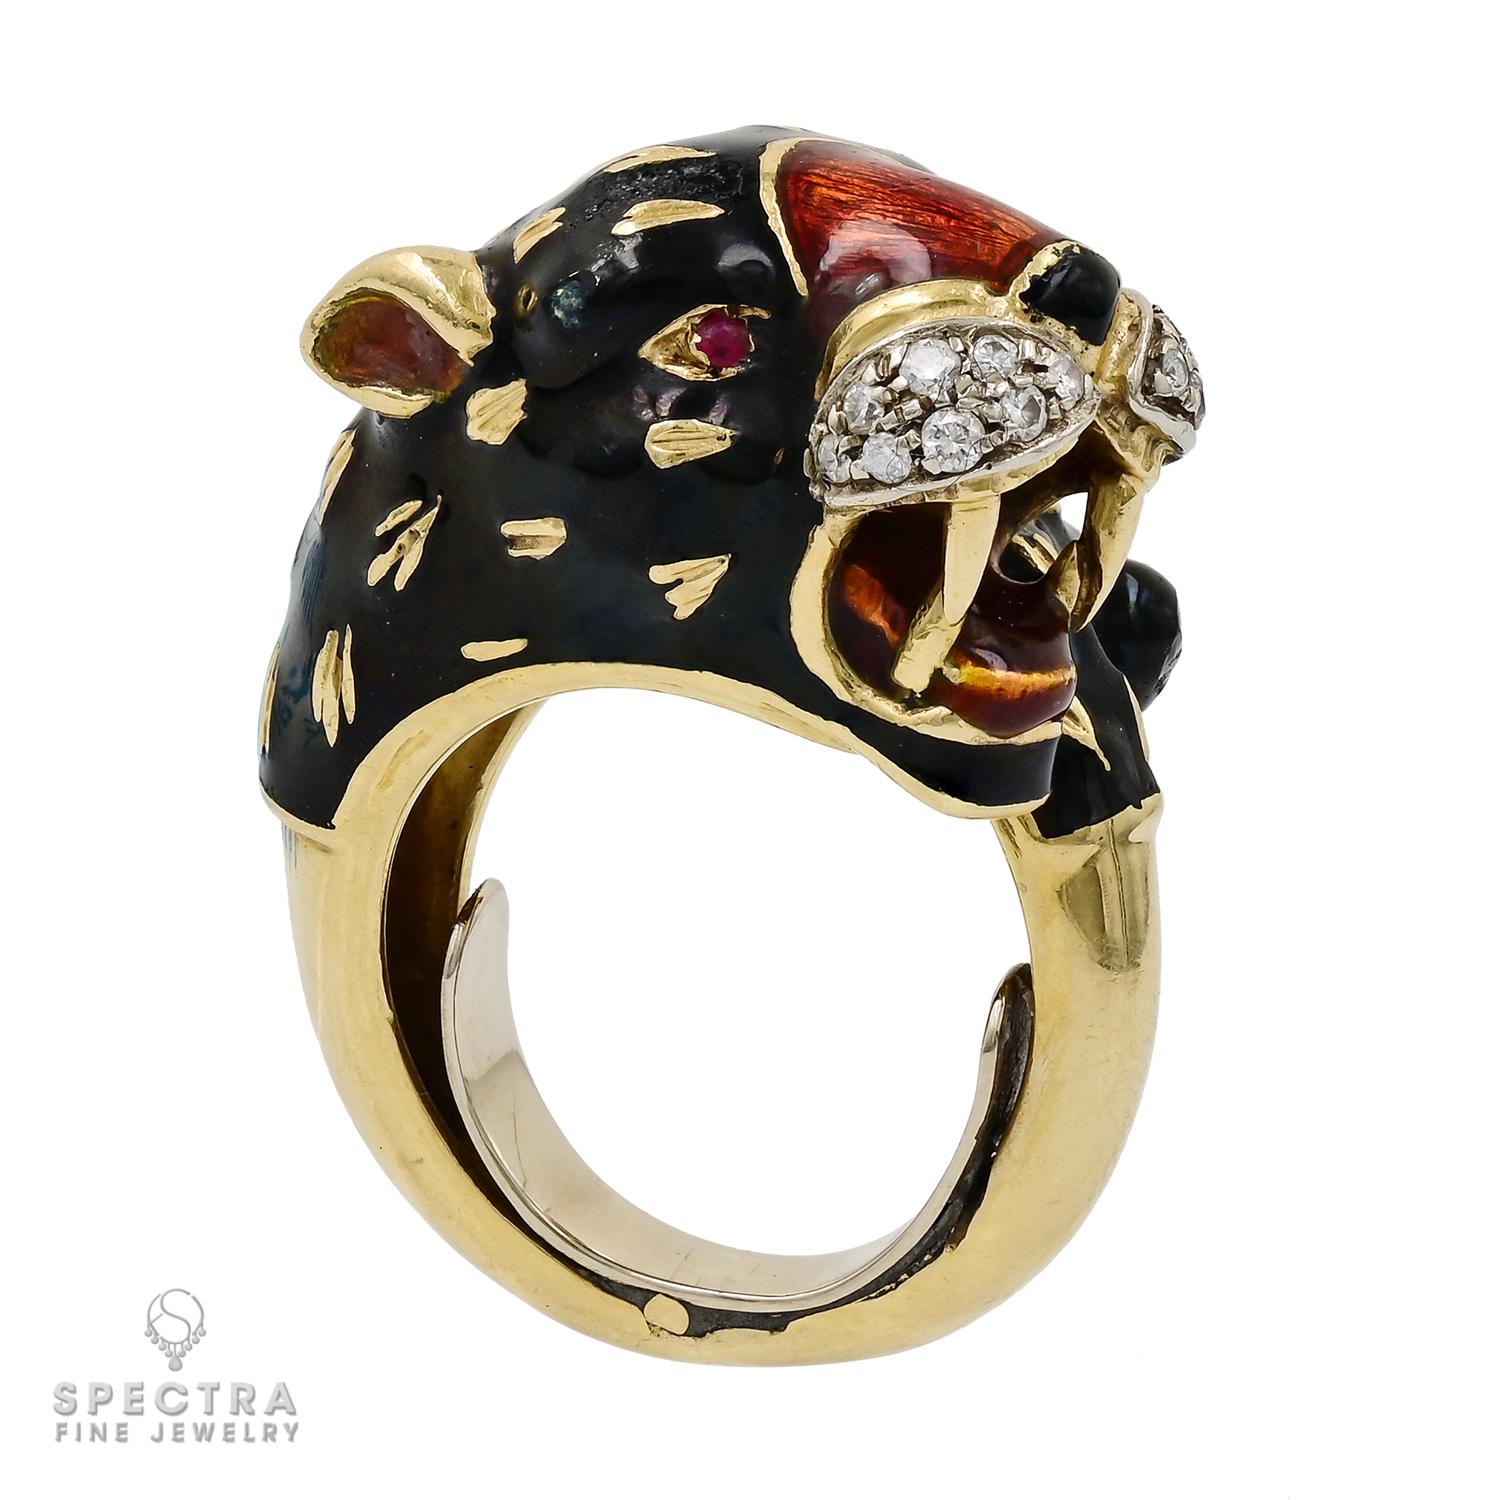 This exquisite Diamond Enamel Leopard ring showcases a captivating creature that entirely transforms its form. Crafted in the 21st century from 18k yellow and white gold, the leopard's design is nothing short of enchanting. The feline's head